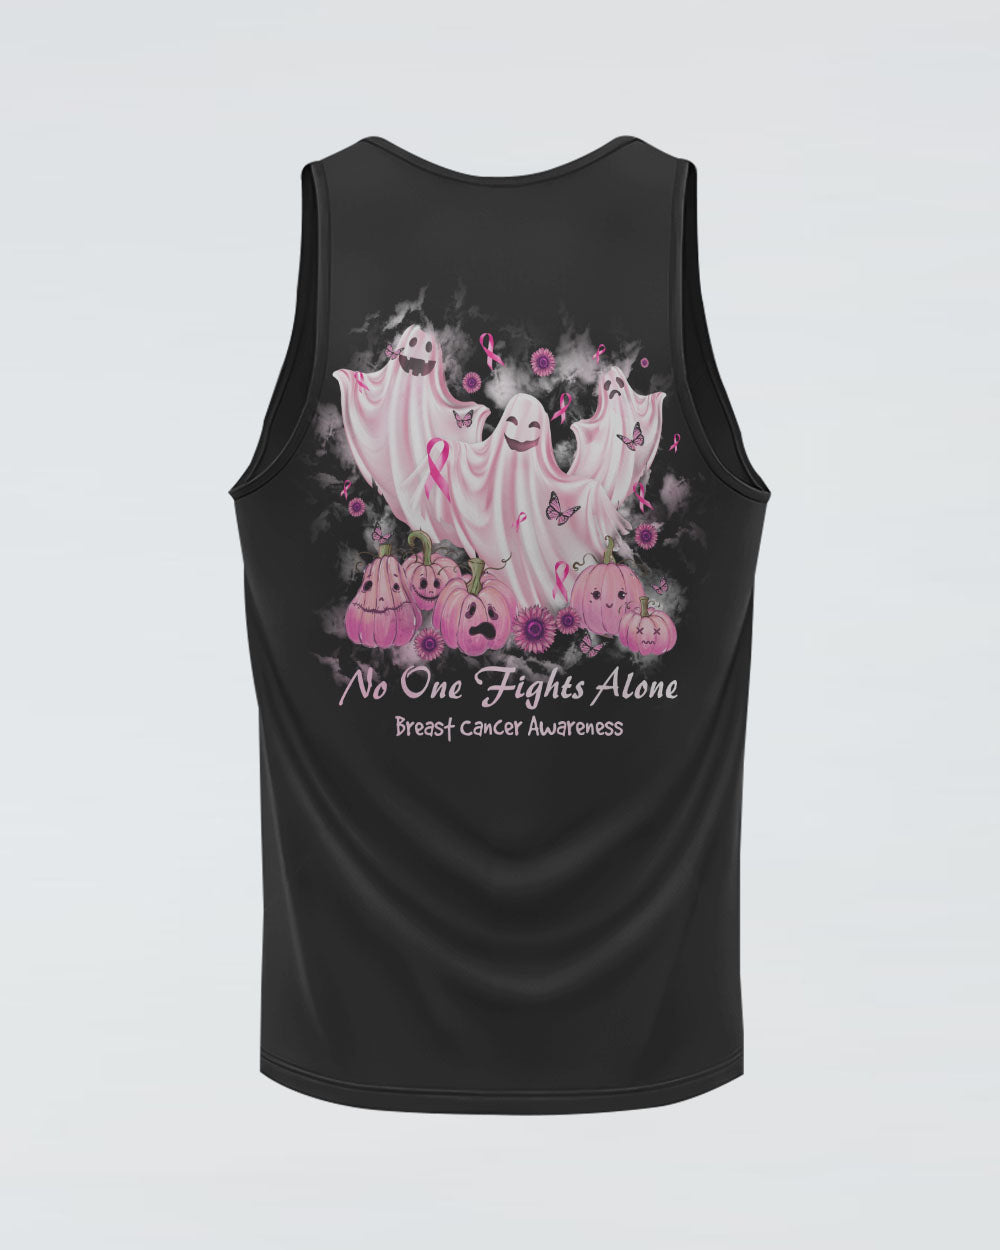 No One Fights Alone Boo Halloween Women's Breast Cancer Awareness Tanks